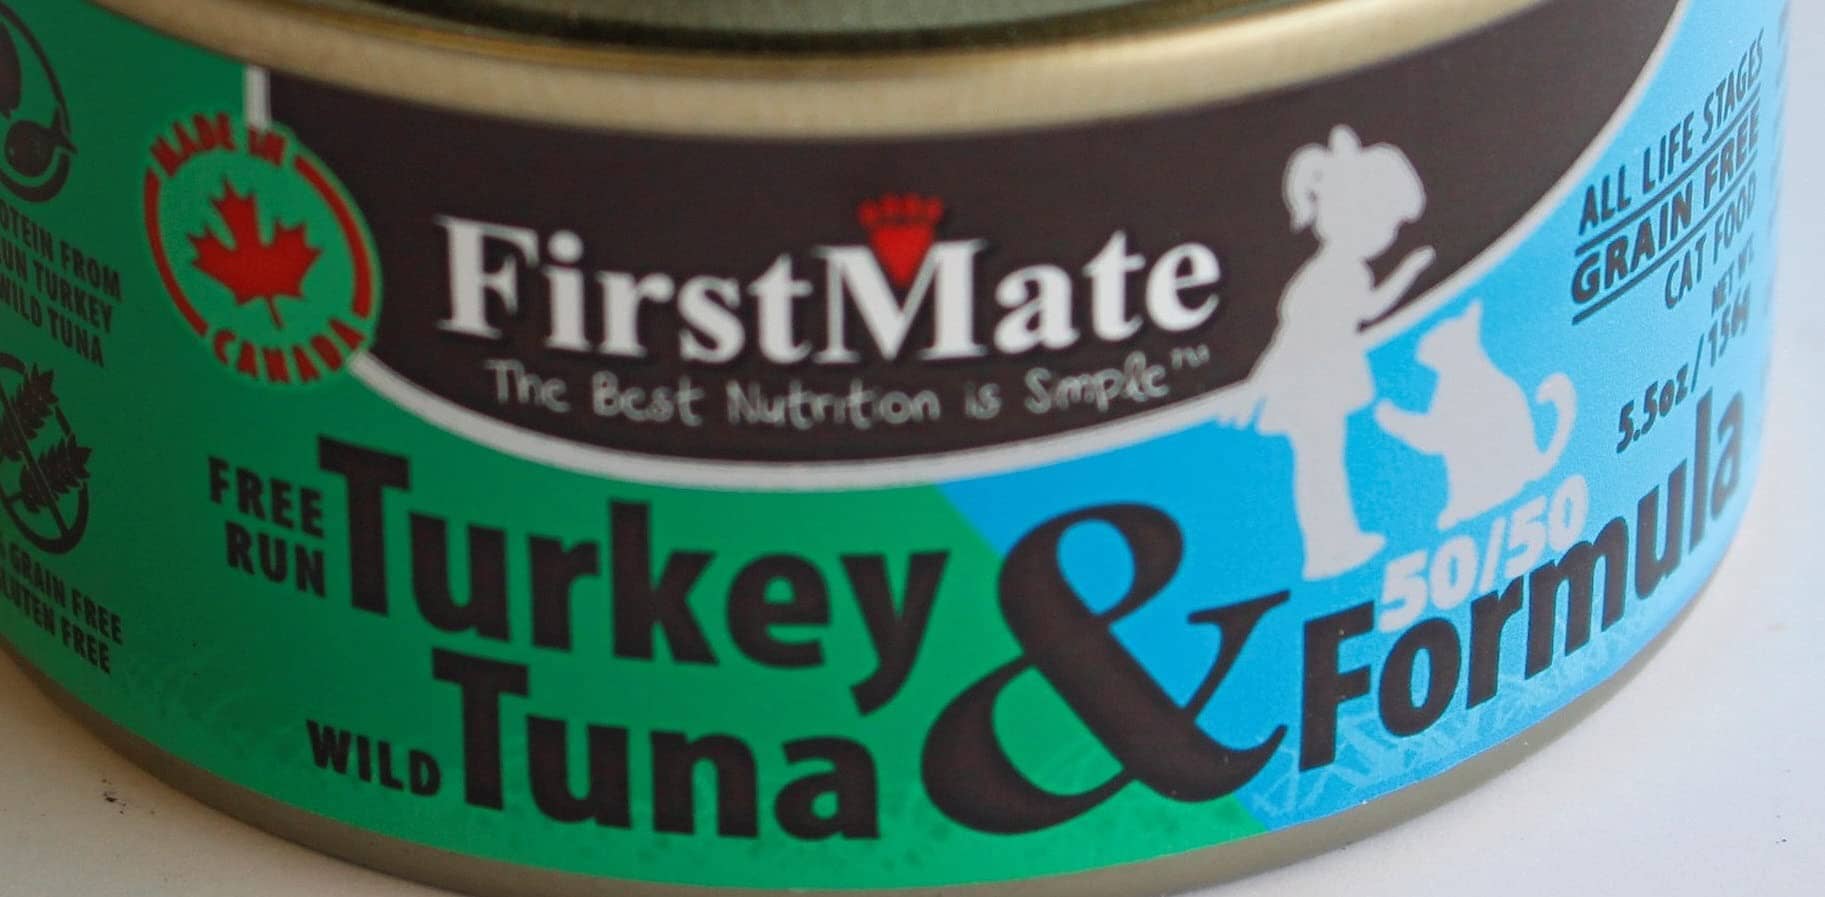 Firstmate 50-50 Turkey and Tuna Canned Cat Food - 5.5 Oz - Case of 24  